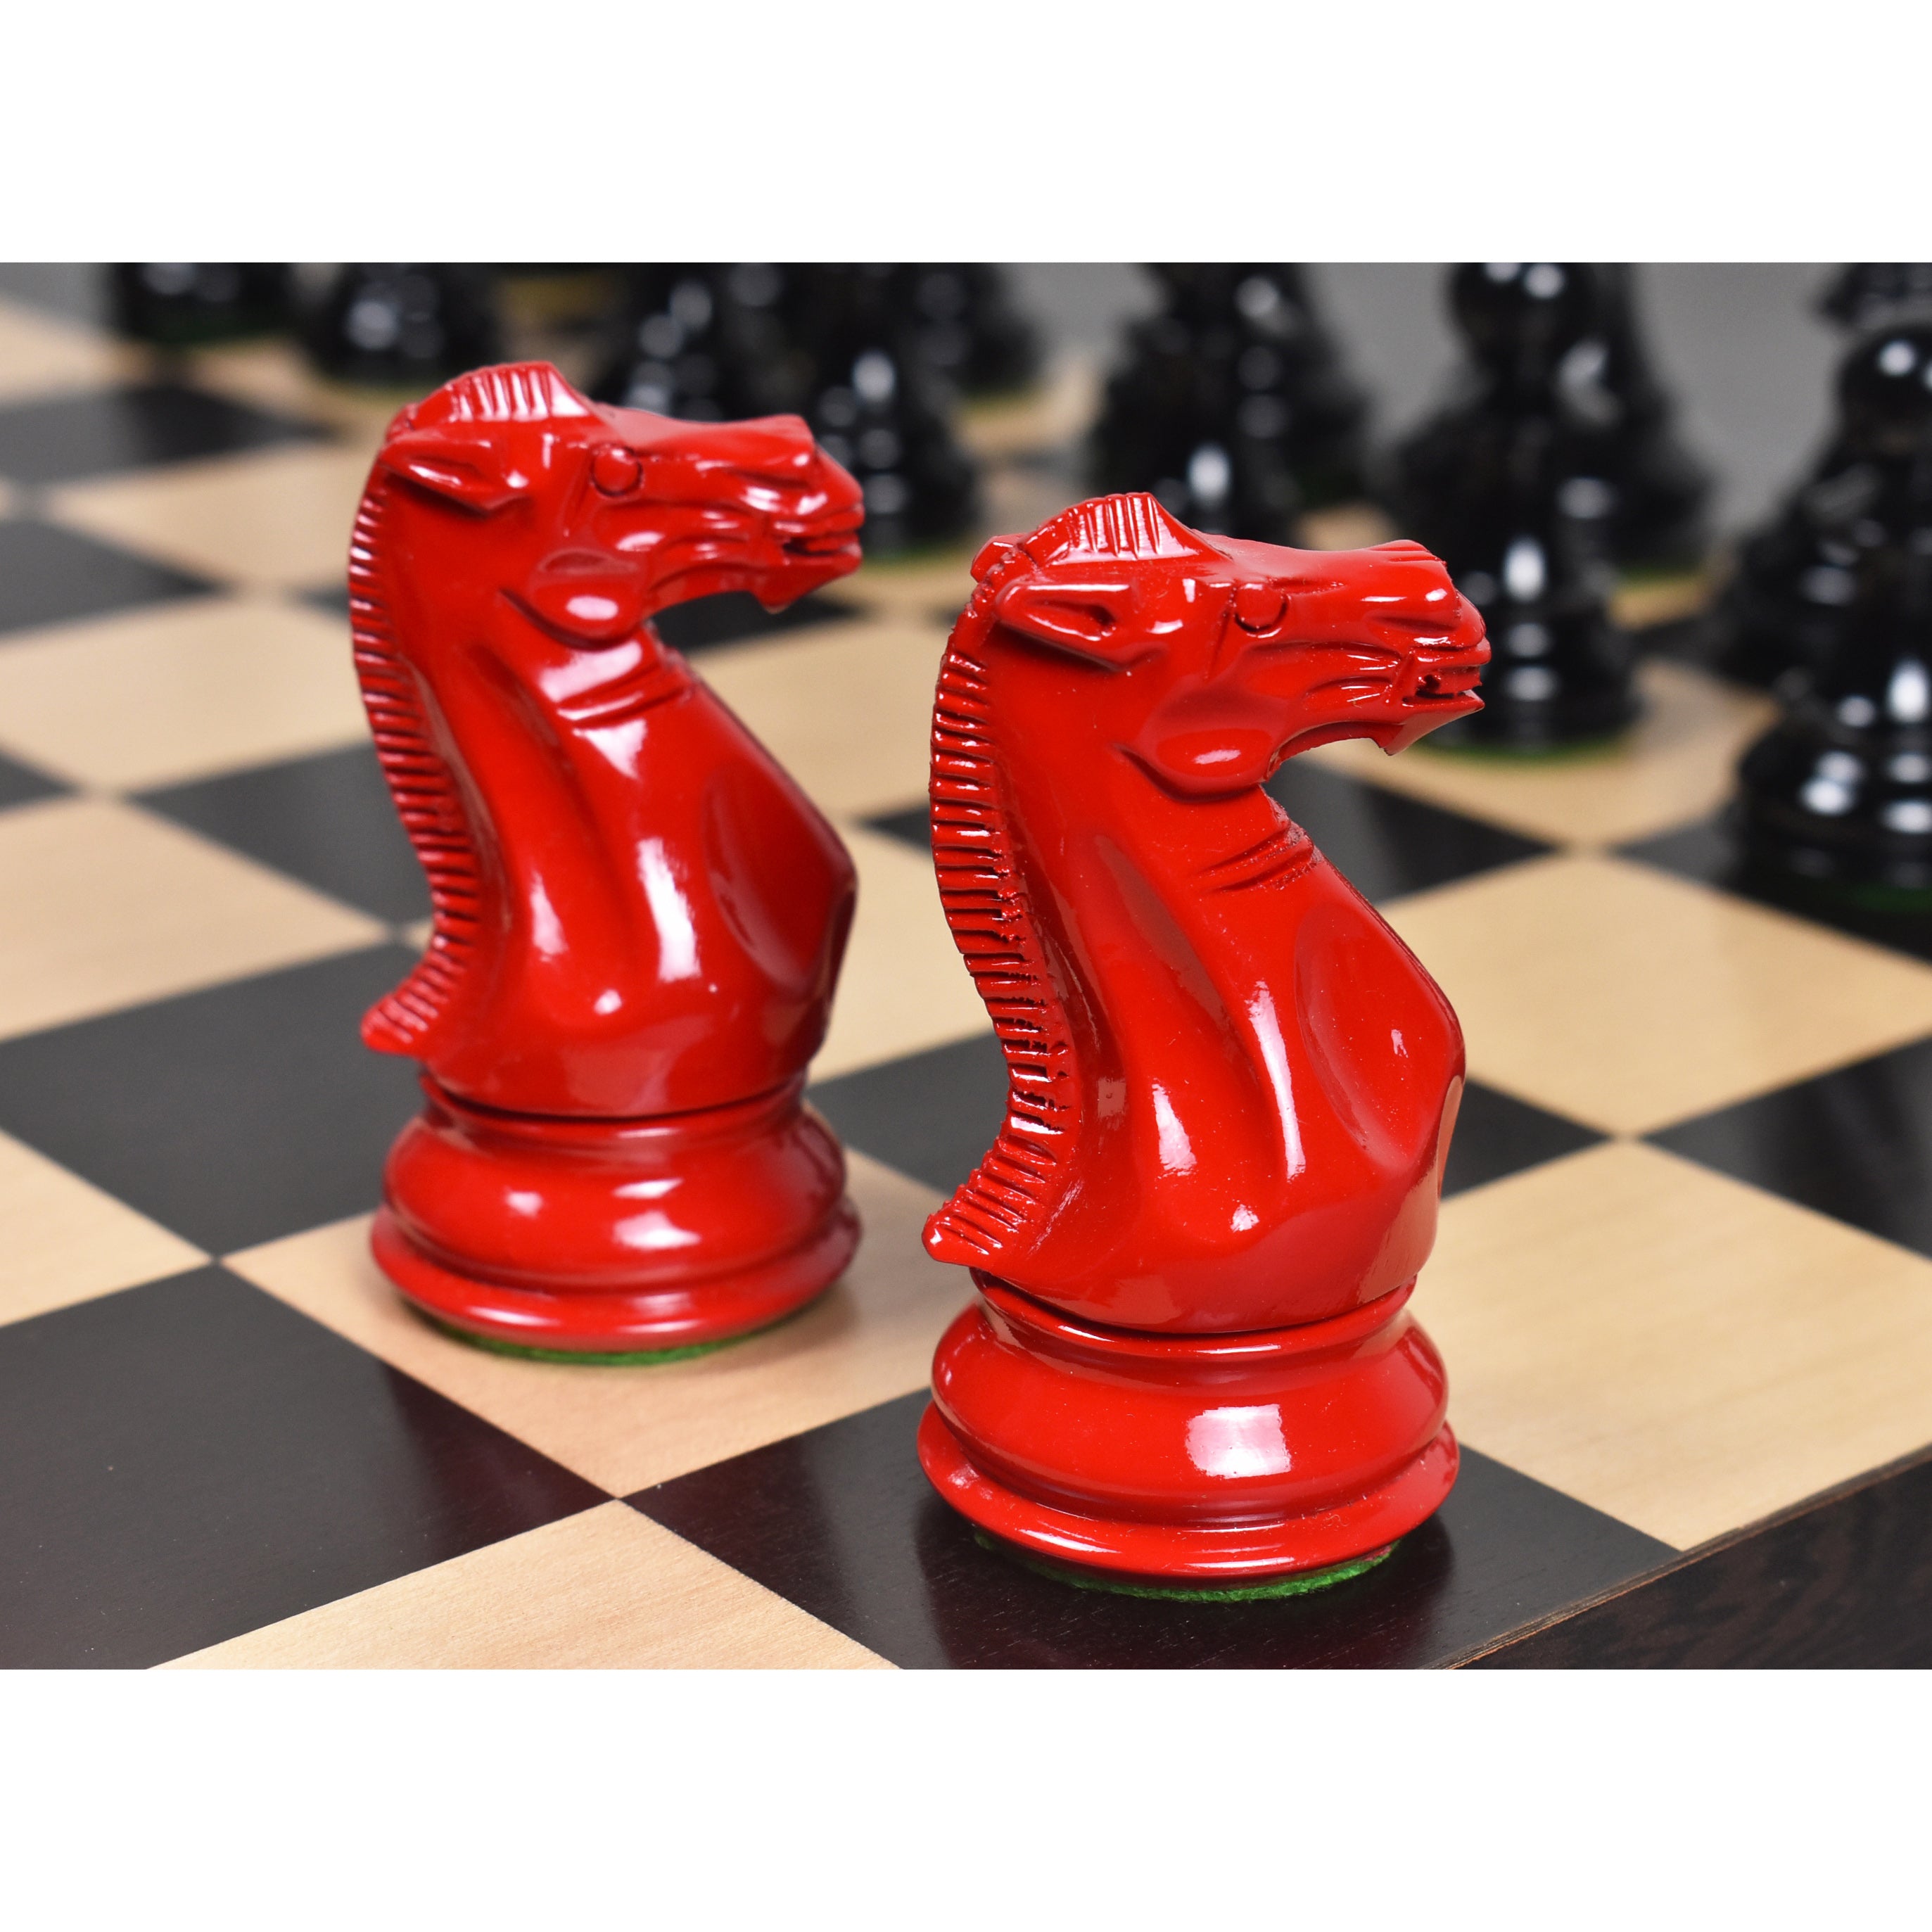 Combo of 4.1" Pro Staunton Chess Set - Pieces in Painted Boxwood with Board and Box